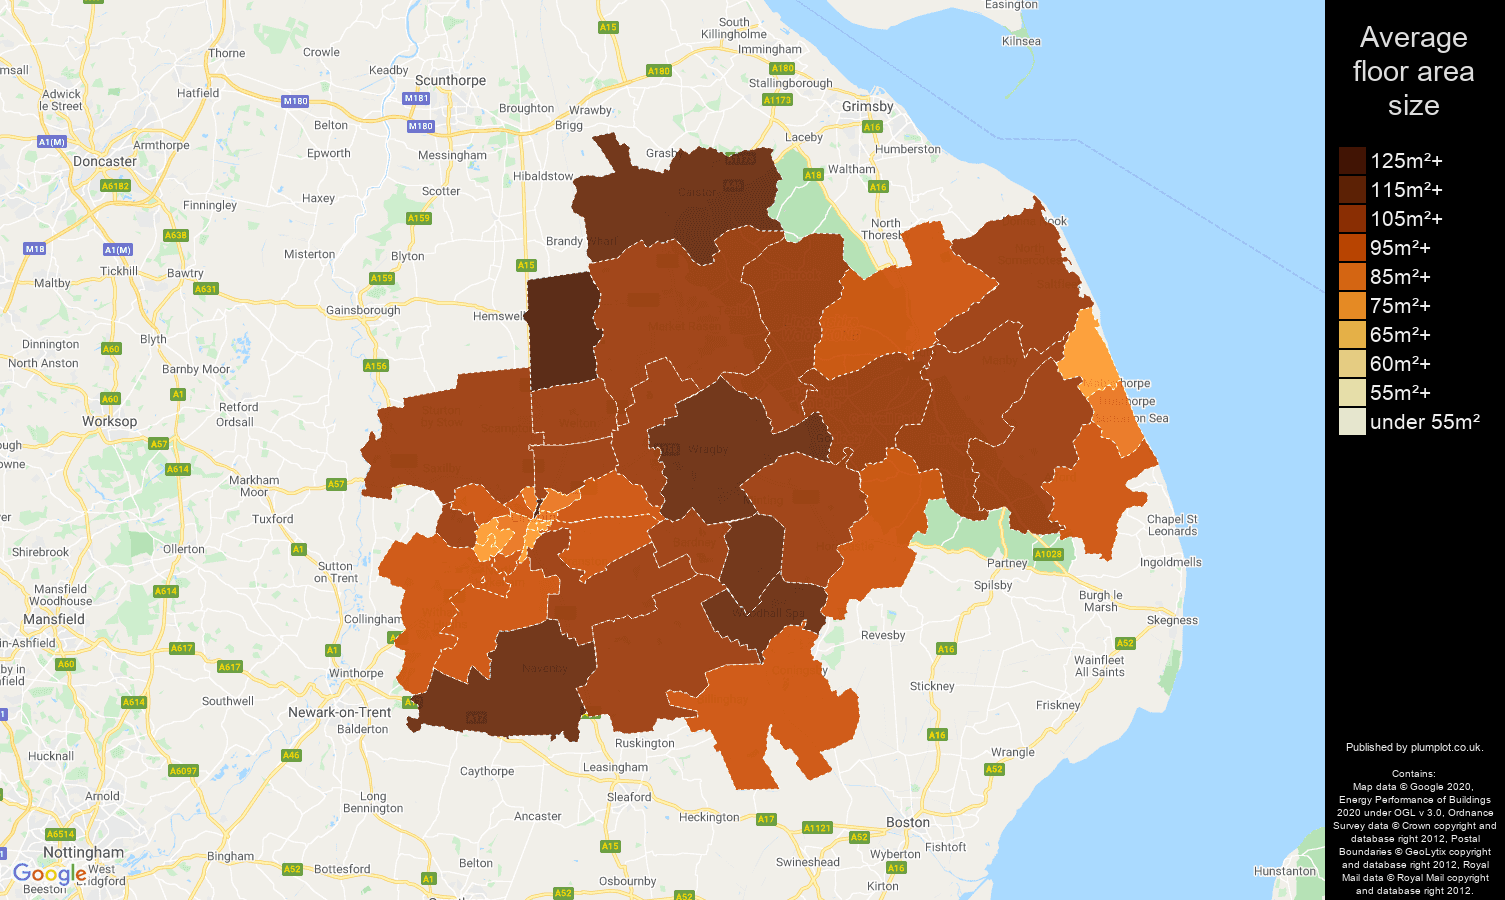 Lincoln map of average floor area size of houses